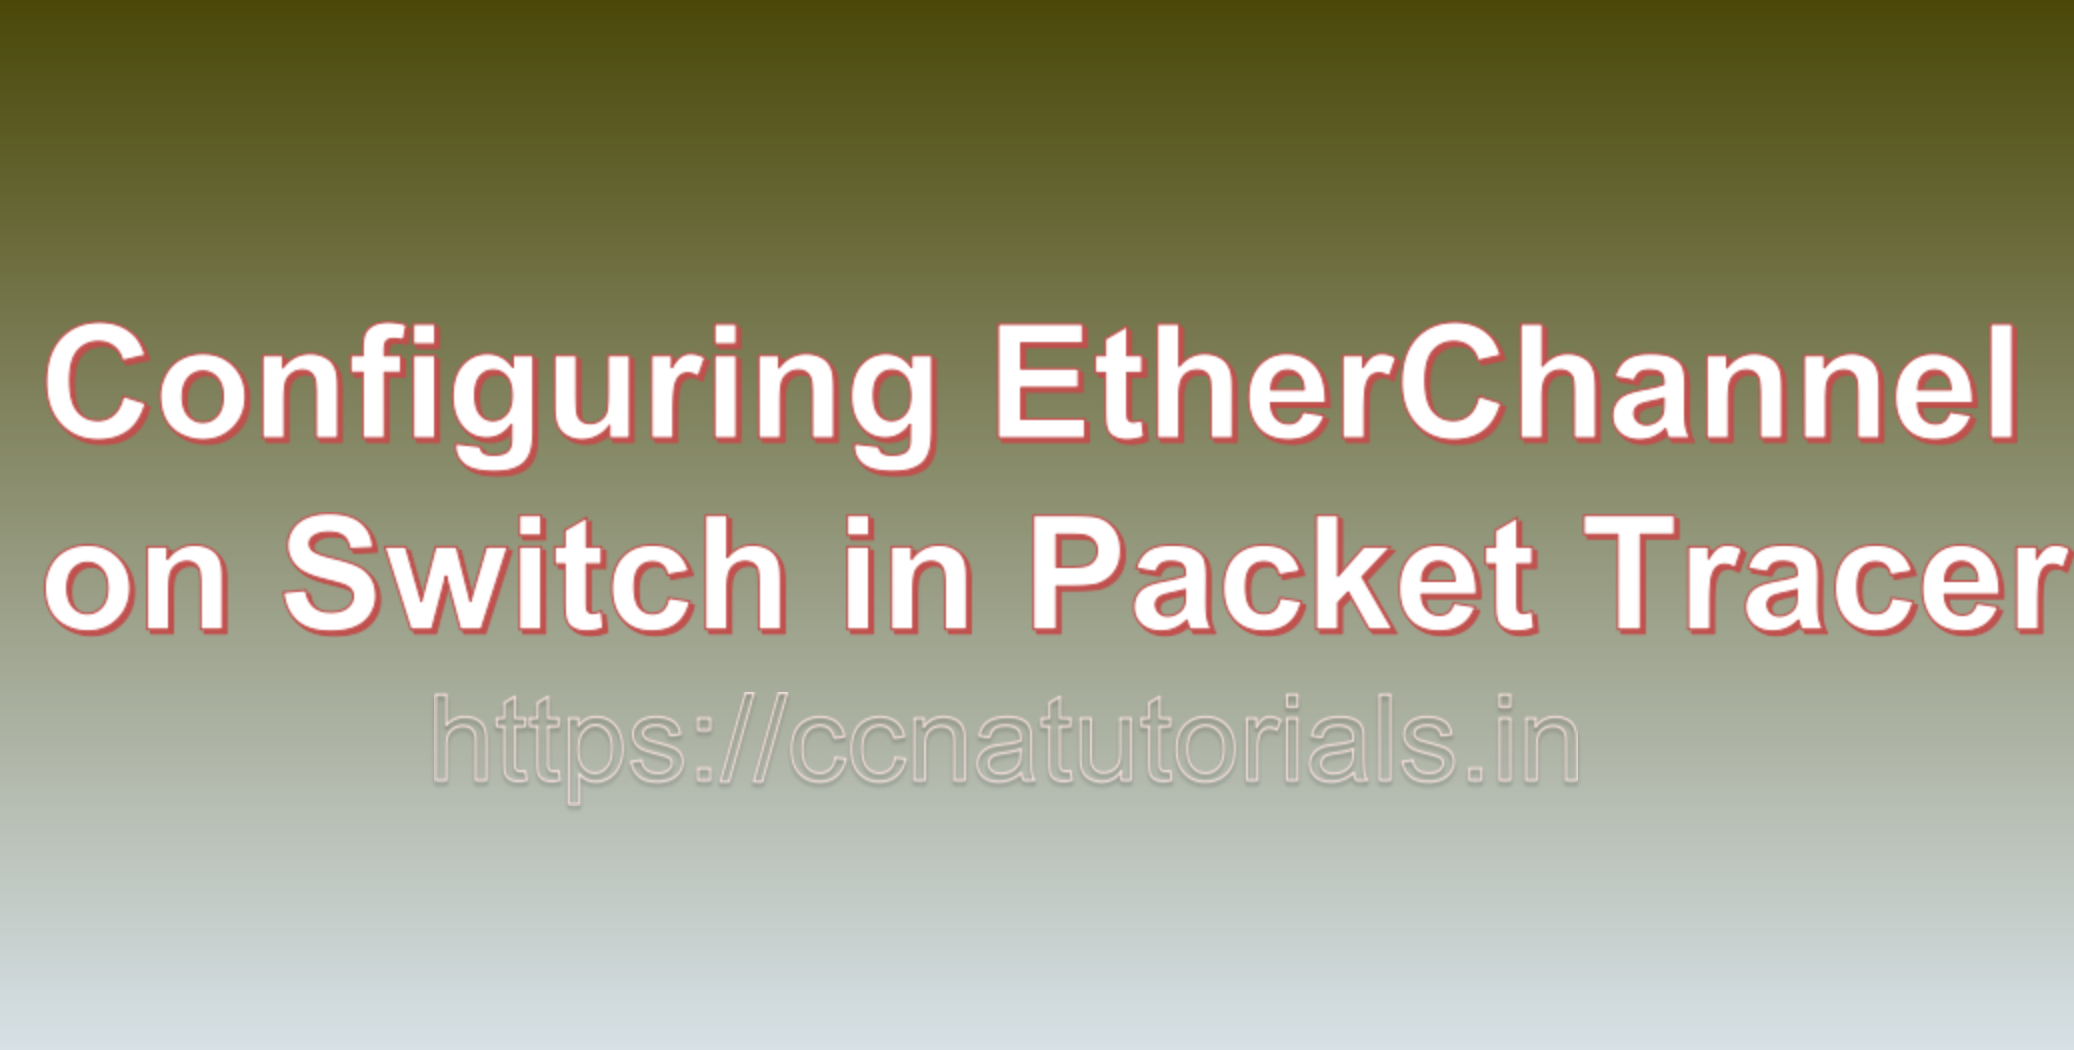 Configuring EtherChannel on a Switch in Packet Tracer, ccna , ccna tutorials